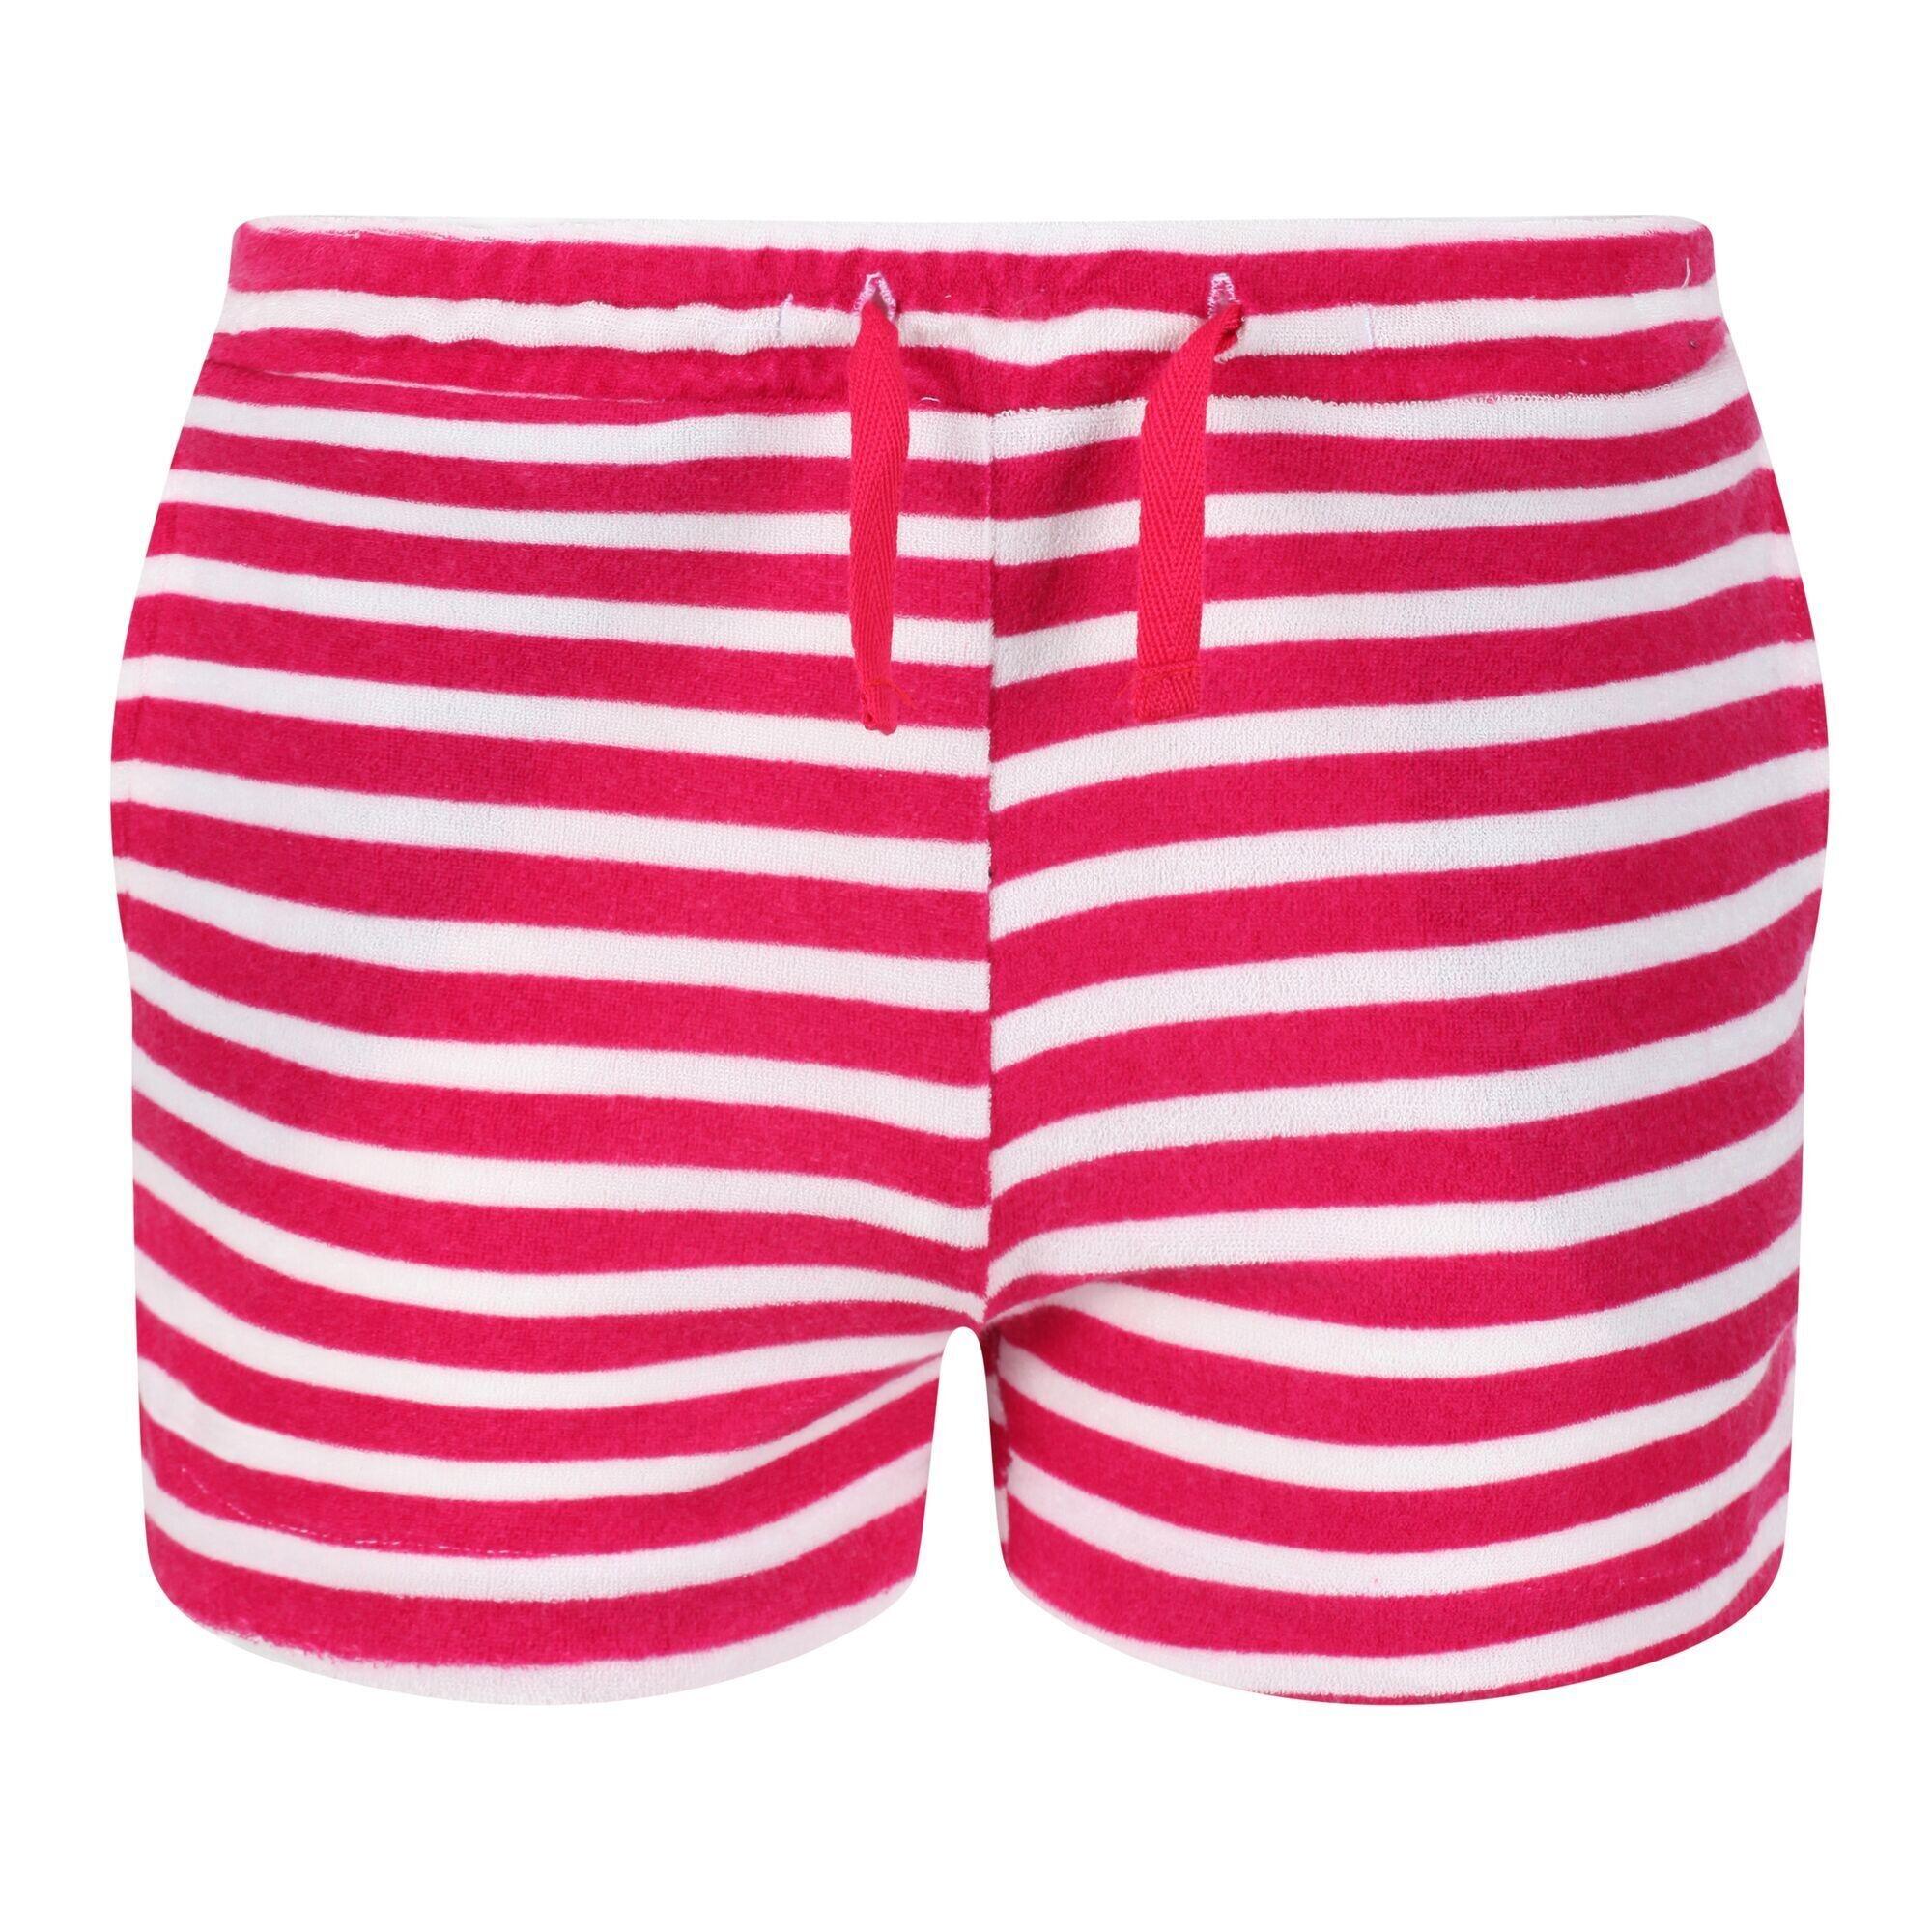 Childrens/Kids Dayana Towelling Stripe Casual Shorts (Pink Fusion/White) 1/5